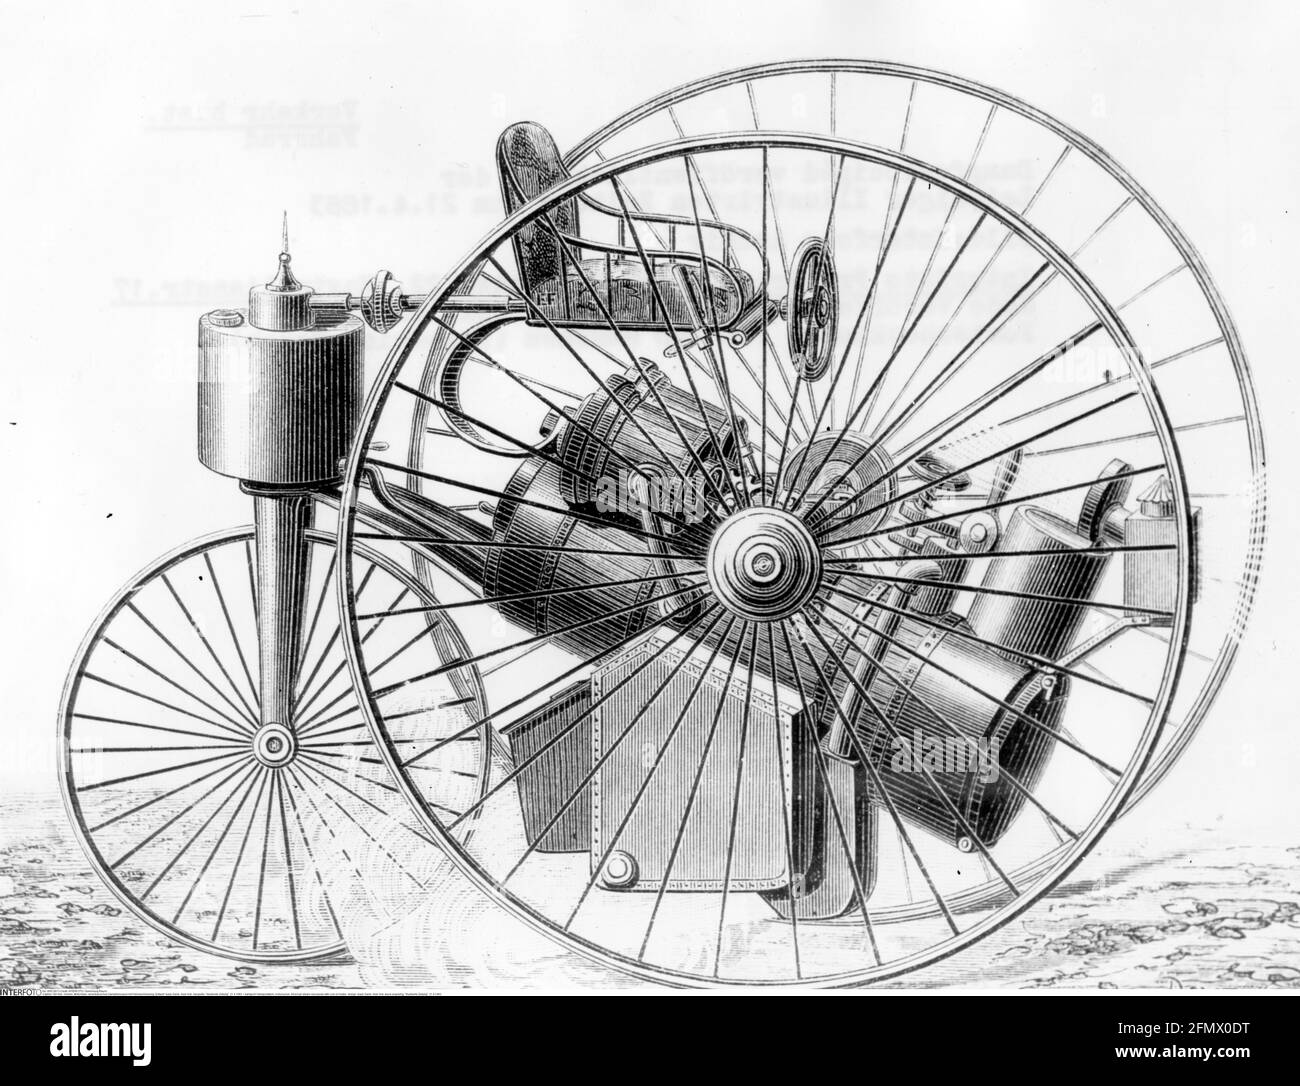 transport / transportation, motorcycles, American steam velocipede with coal oil heater, ARTIST'S COPYRIGHT HAS NOT TO BE CLEARED Stock Photo